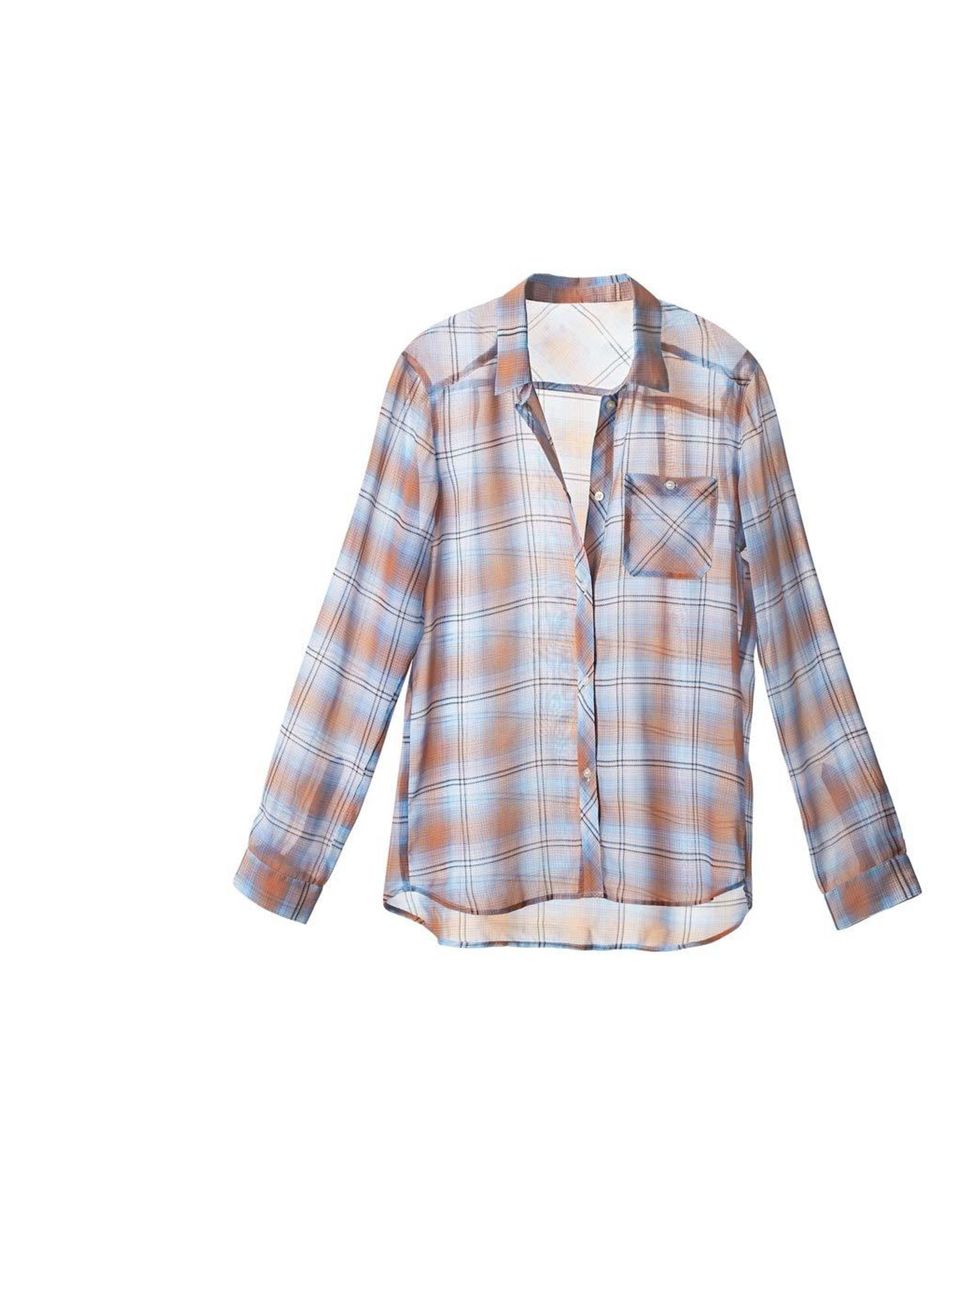 <p>We love the balance between the grunge check and feminine sheer fabric of this shirt <a href="http://www.hm.com/gb/">H&M</a> checked shirt, £14.99</p>